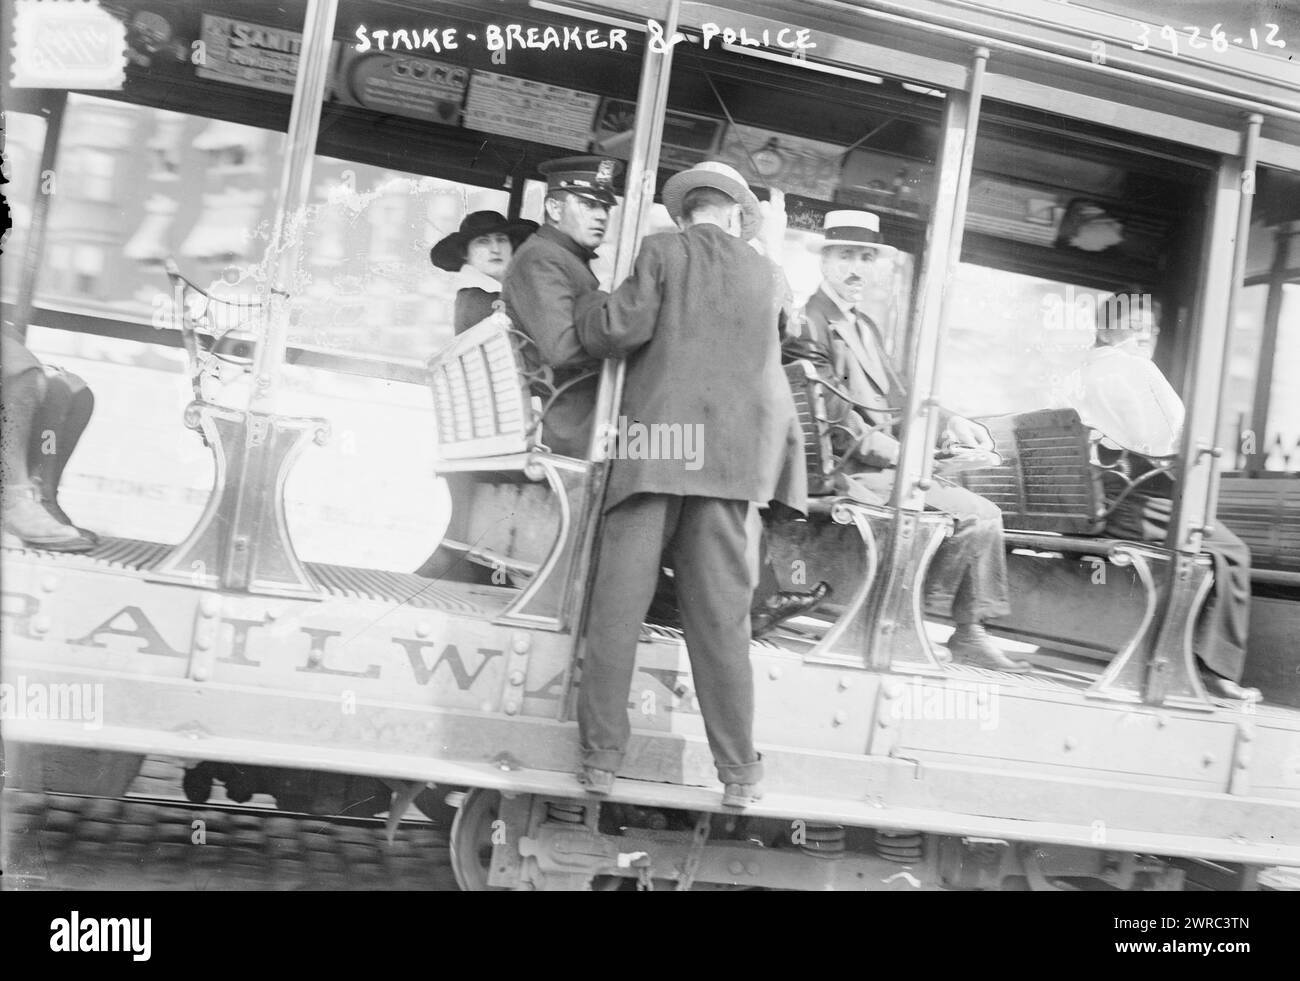 Strike breakers and police, Photograph shows a strike breaker confronting a policeman during the New York railroad workers strike which started in August of 1916., 1916 Aug. 8, Glass negatives, 1 negative: glass Stock Photo